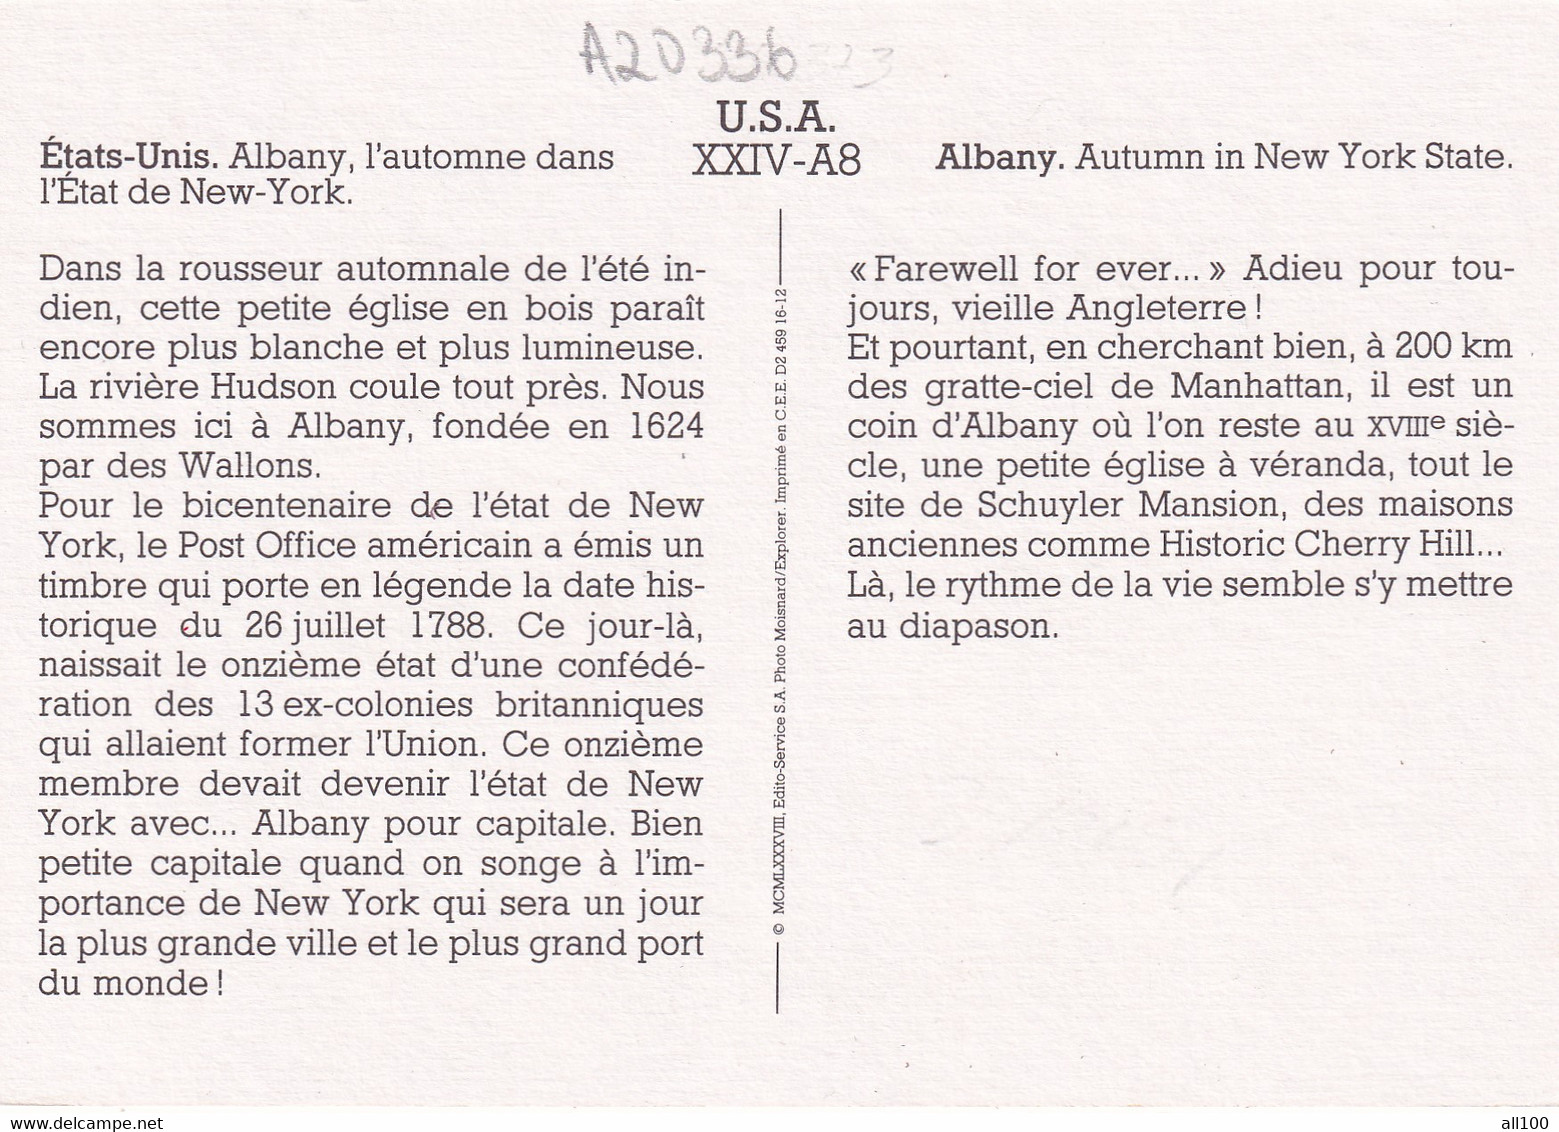 A20336 - ALBANY AUTUMN IN NEW YORK STATE L'AUTOMNE DANS D'ETAT DE NEW YORK USA UNITED STATES OF AMERICA - Albany